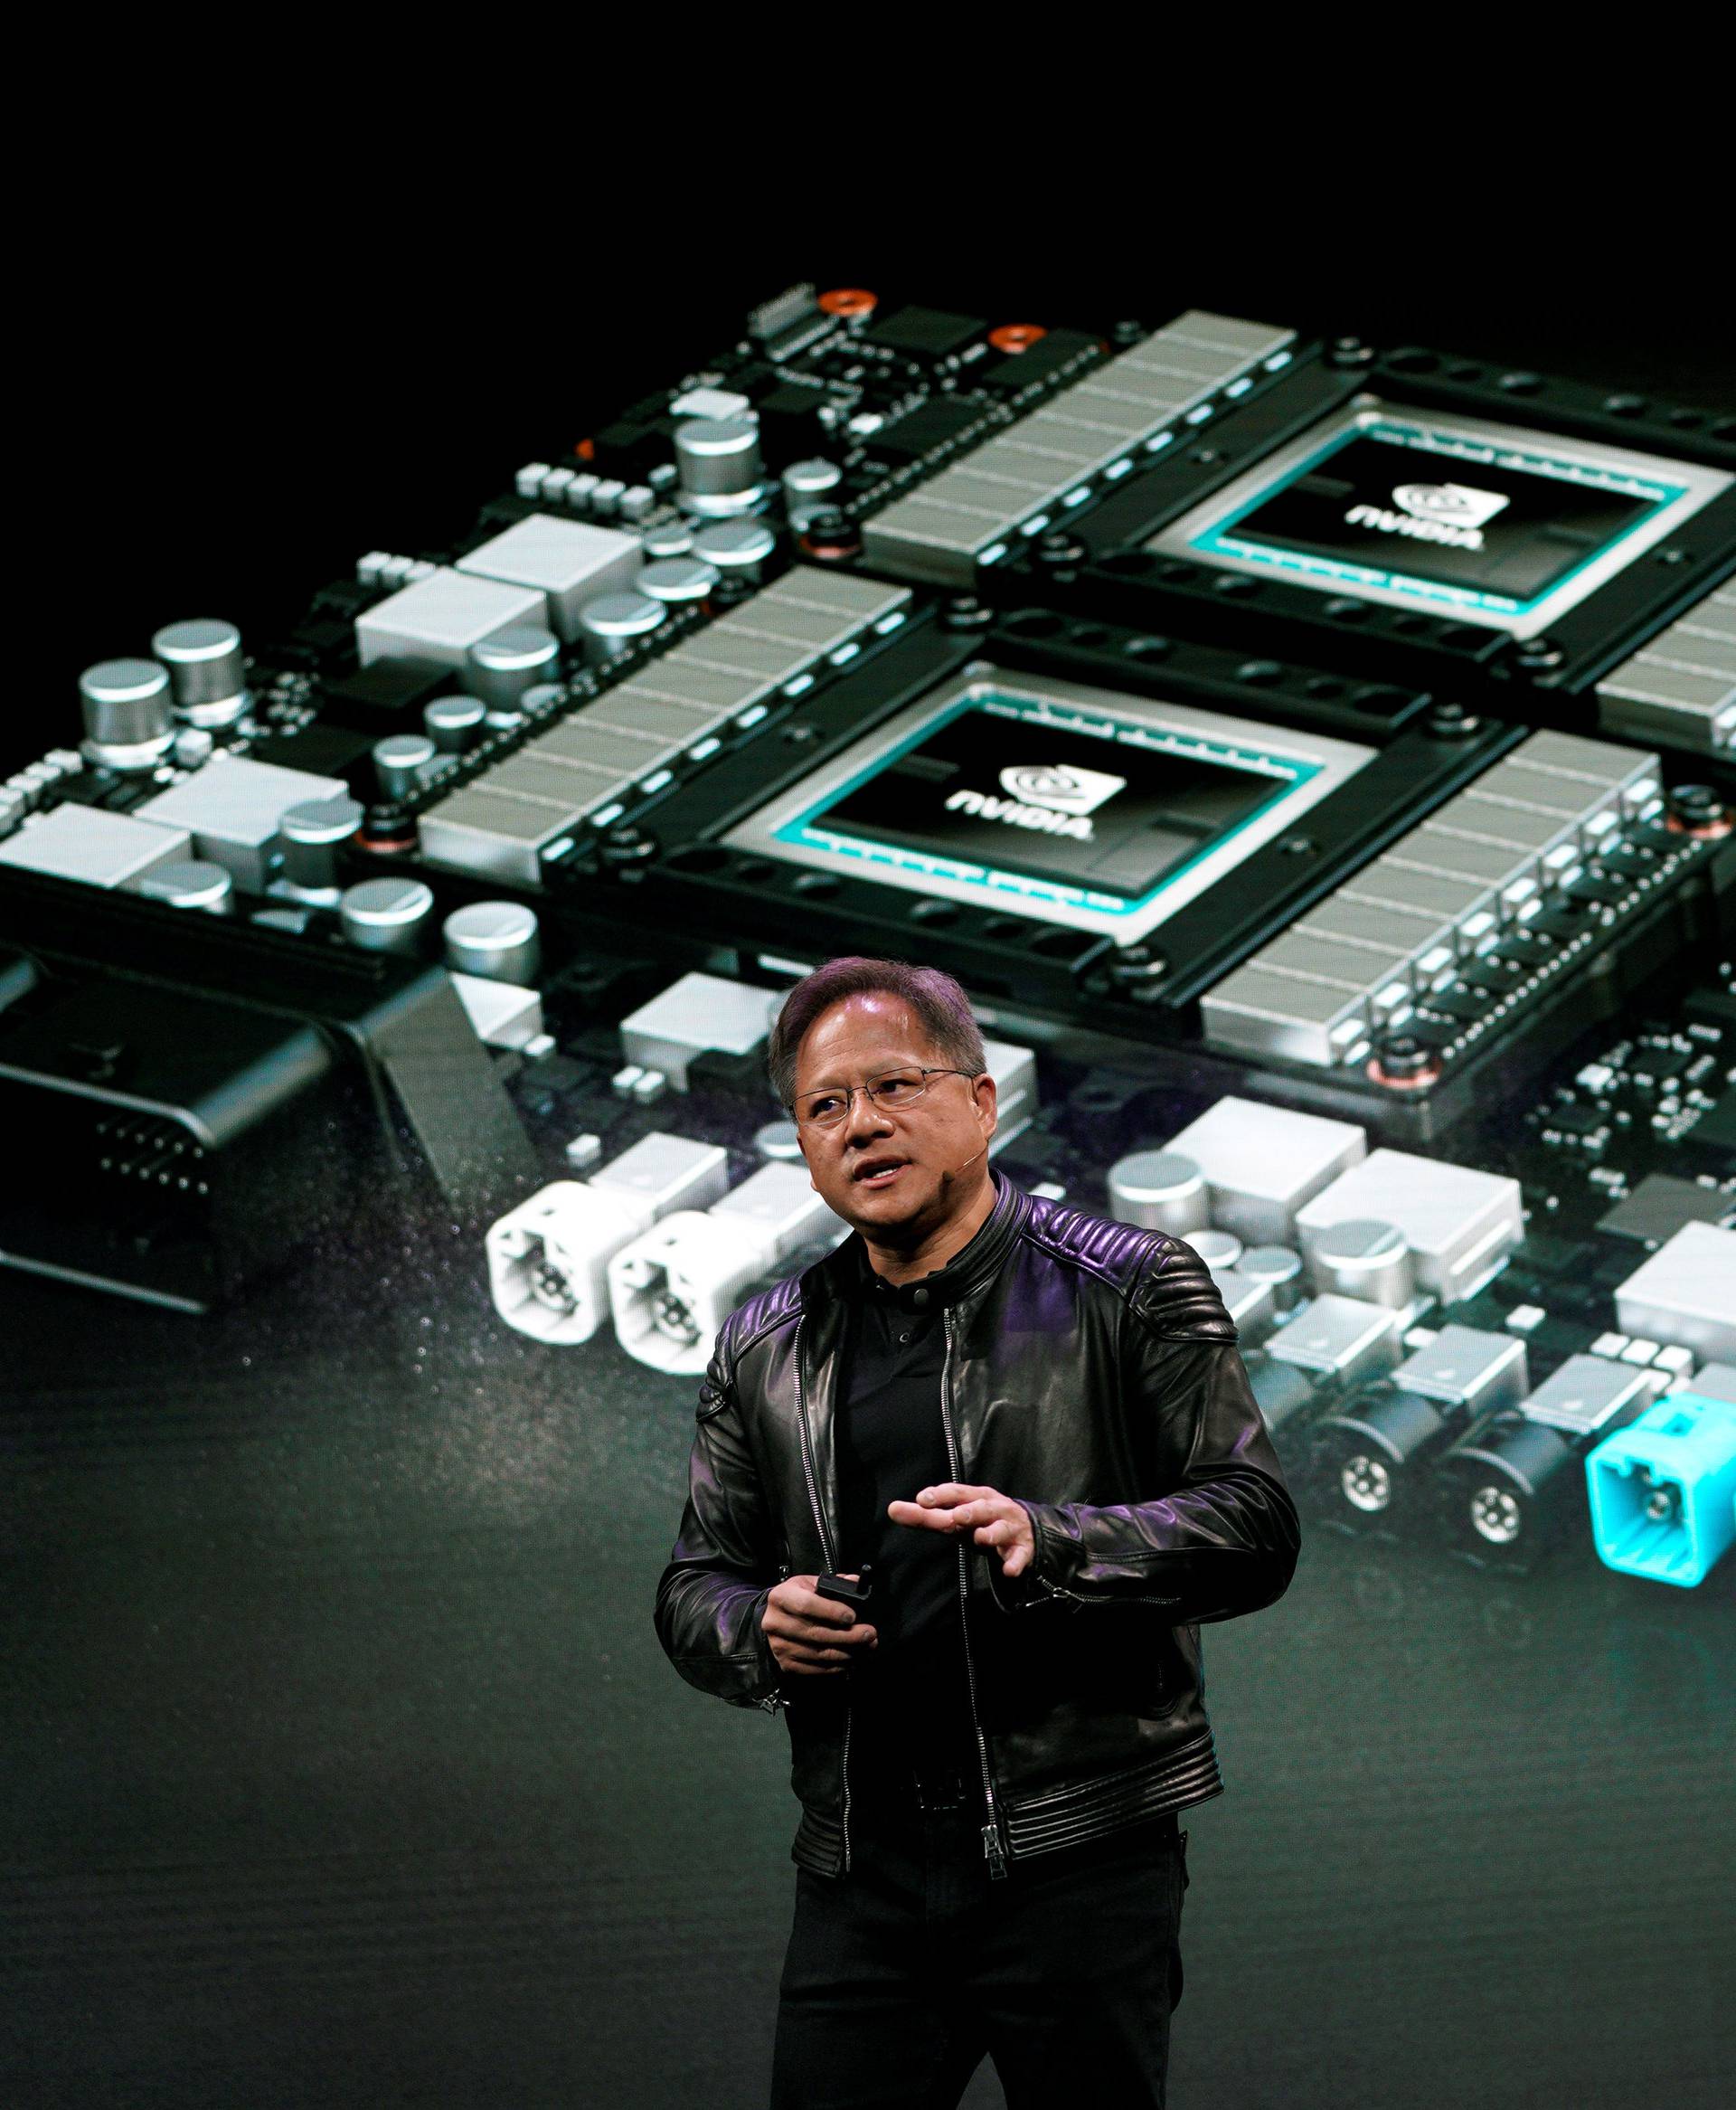 Jensen Huang, CEO of Nvidia, shows the Drive Pegasus robotaxi AI computer at his keynote address at CES in Las Vegas